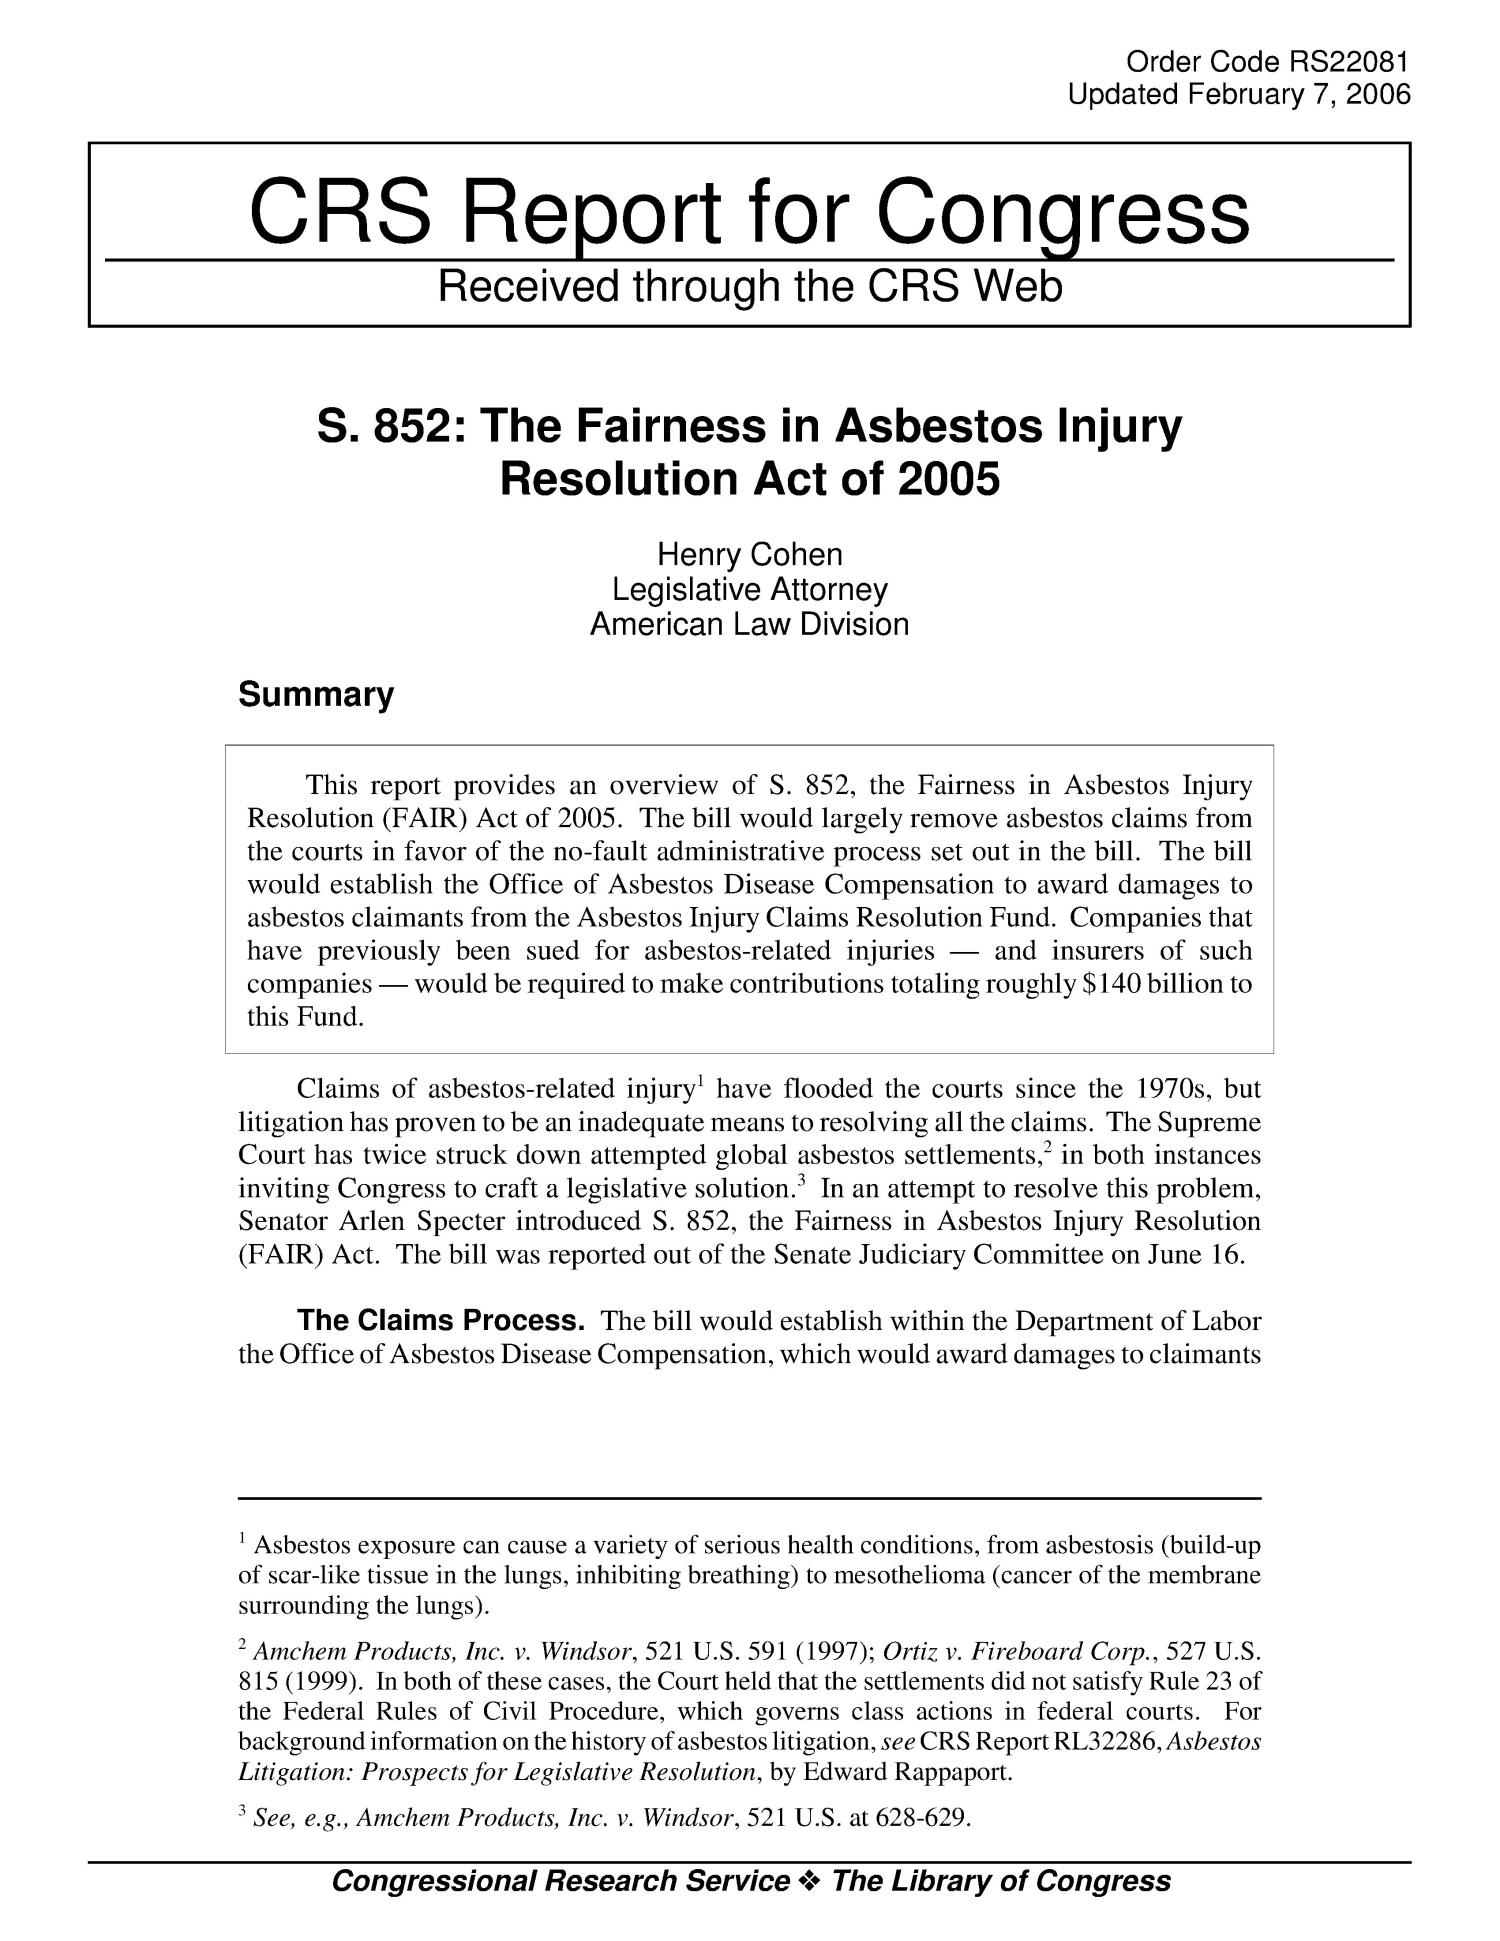 S. 852: The Fairness in Asbestos Injury Resolution Act of 2005
                                                
                                                    [Sequence #]: 1 of 6
                                                